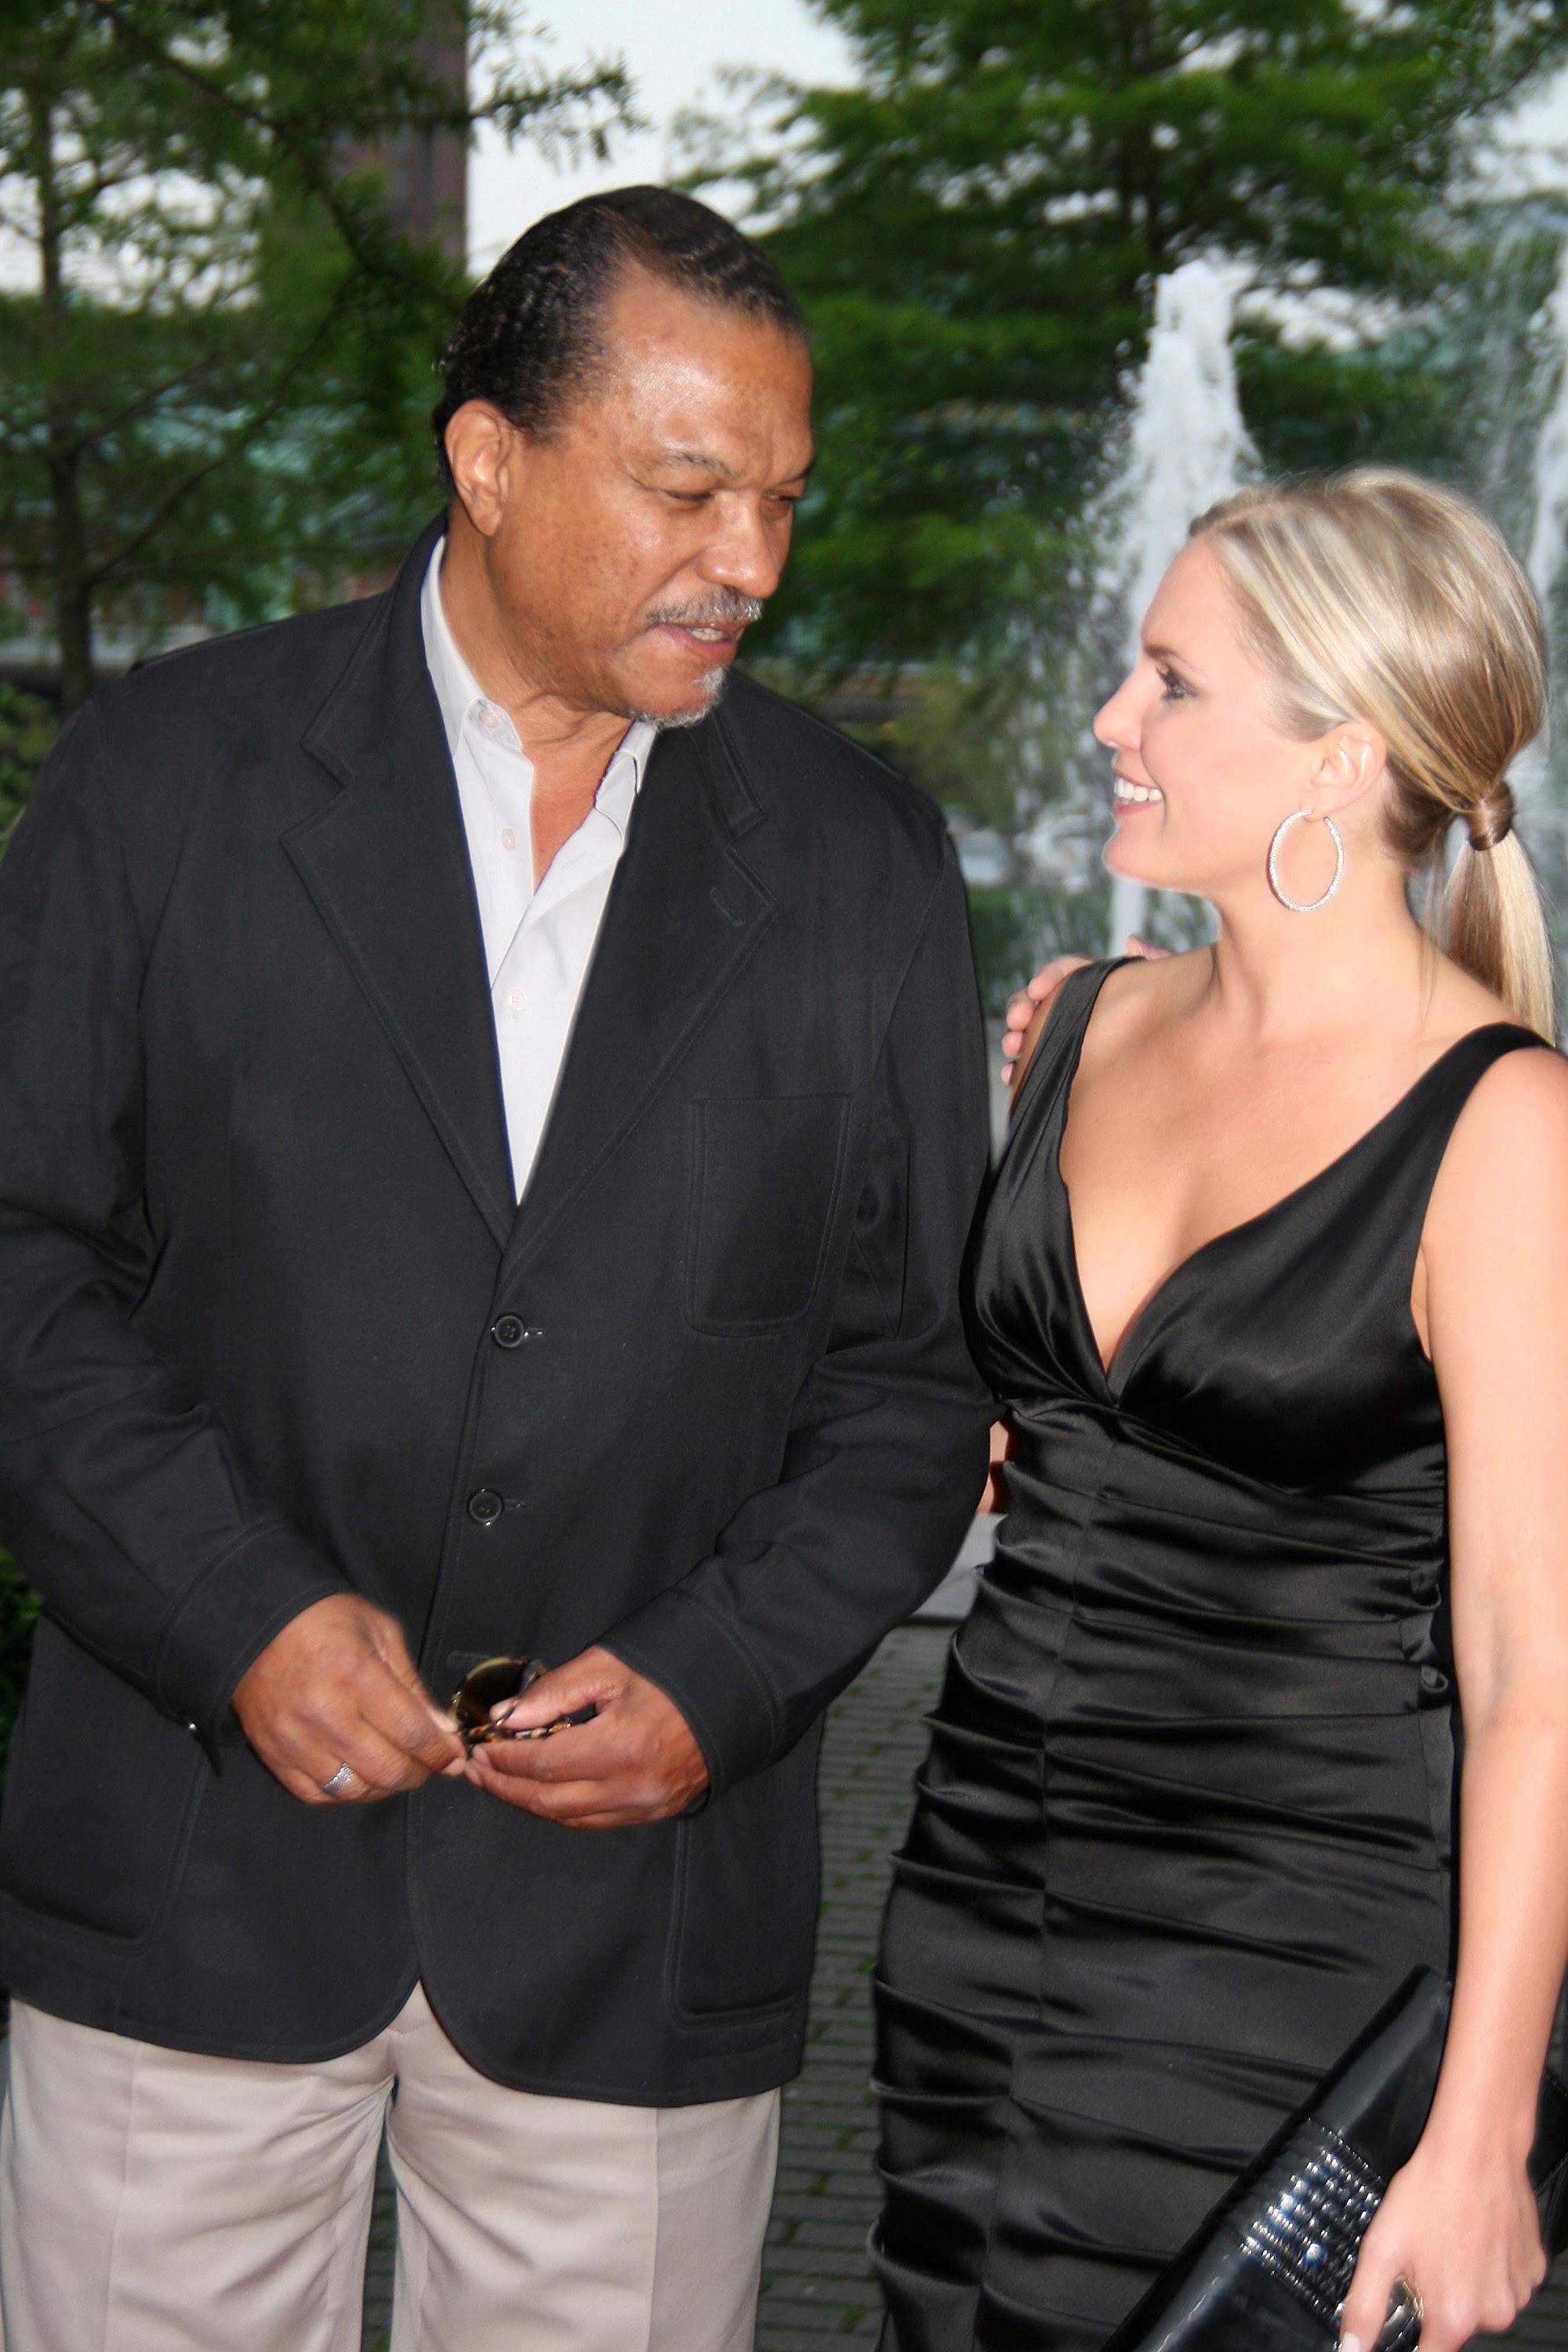 Billy Dee Williams and Terri Conn at the Gala Awards Ceremony of the 2008 Hoboken International Film Festival Hoboken, New Jersey USA 06/05/2008